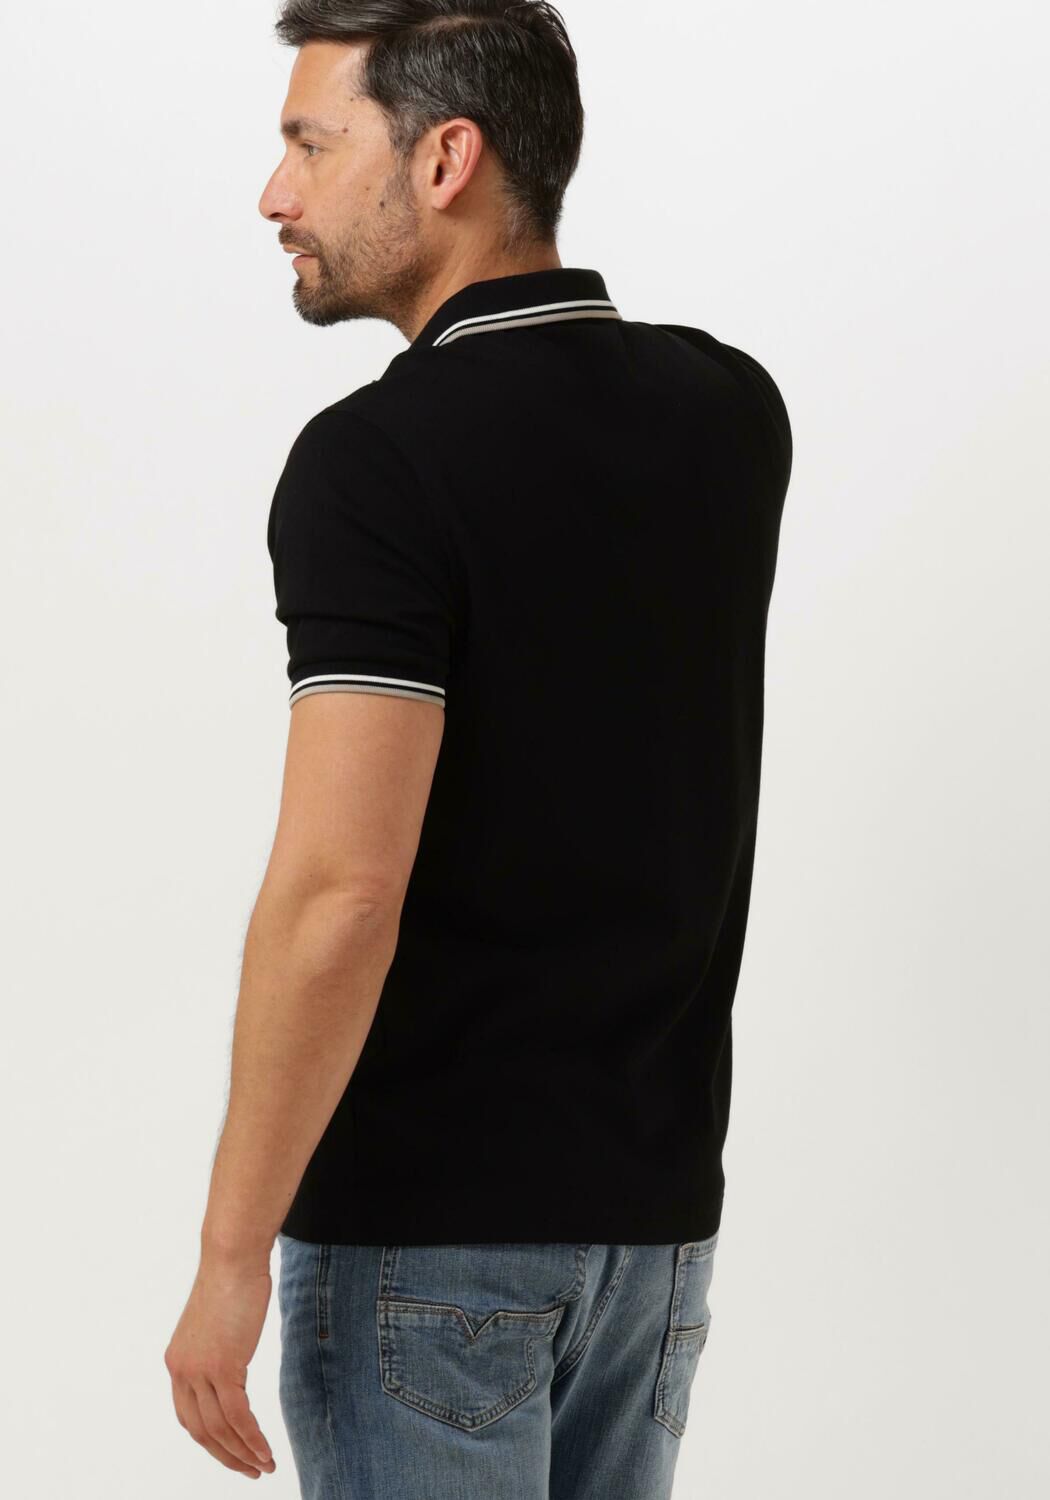 FRED PERRY Heren Polo's & T-shirts The Twin Tipped Shirt Zwart